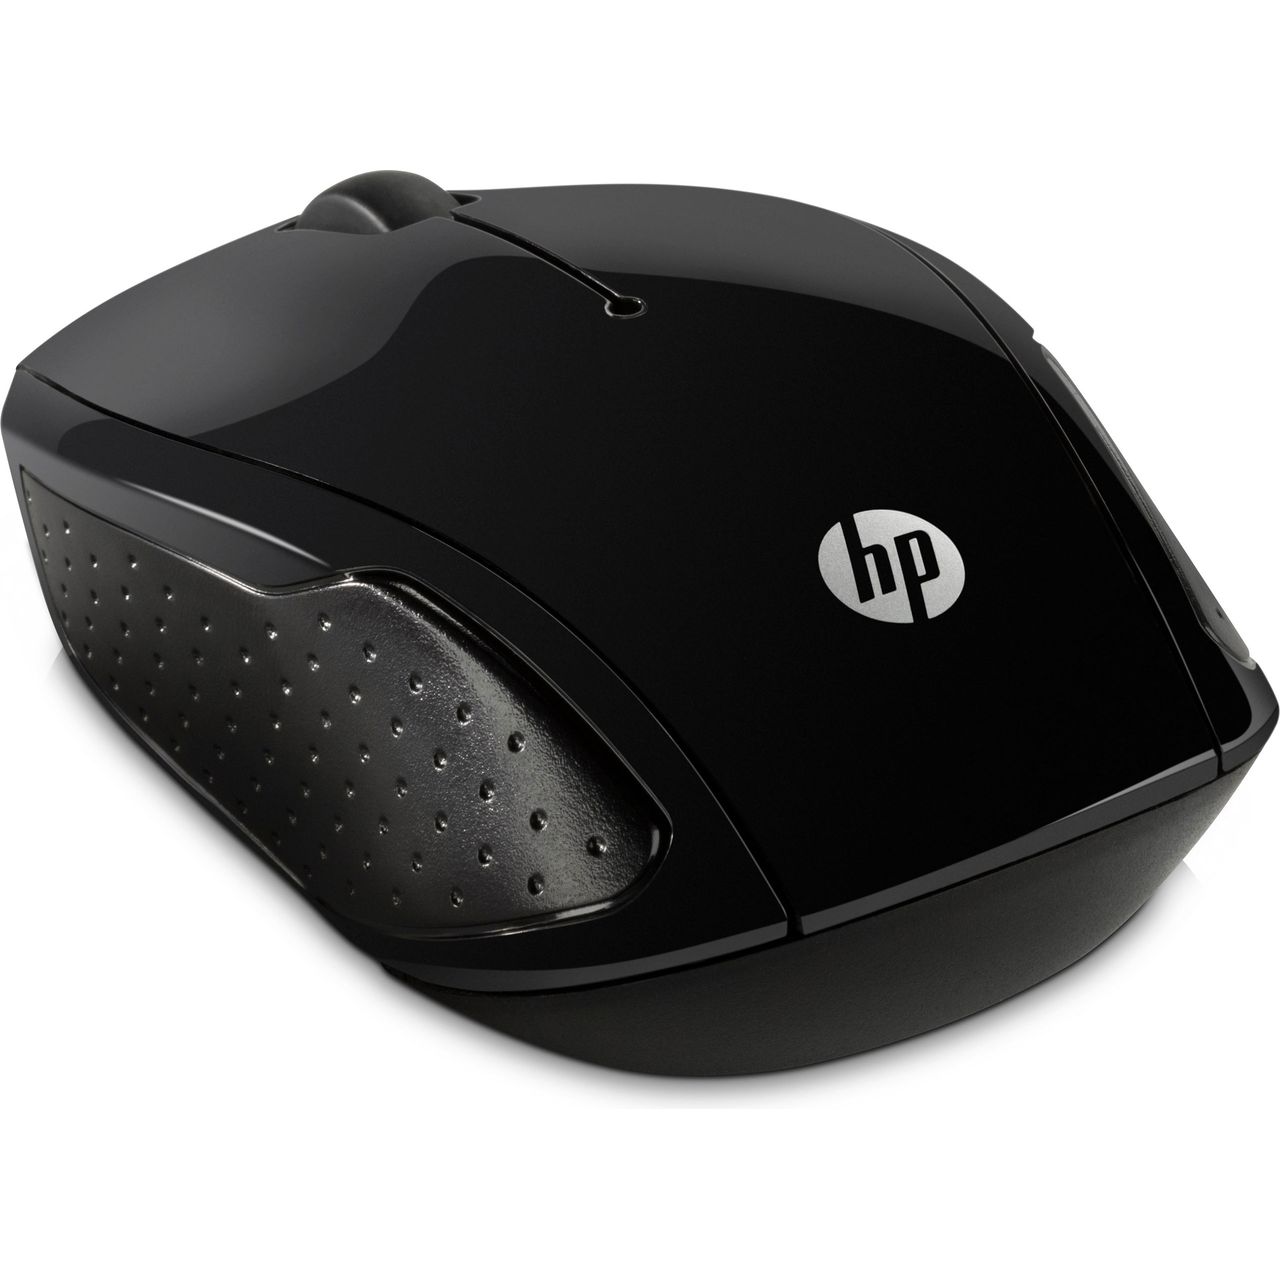 HP 200 Wireless USB Laser Review